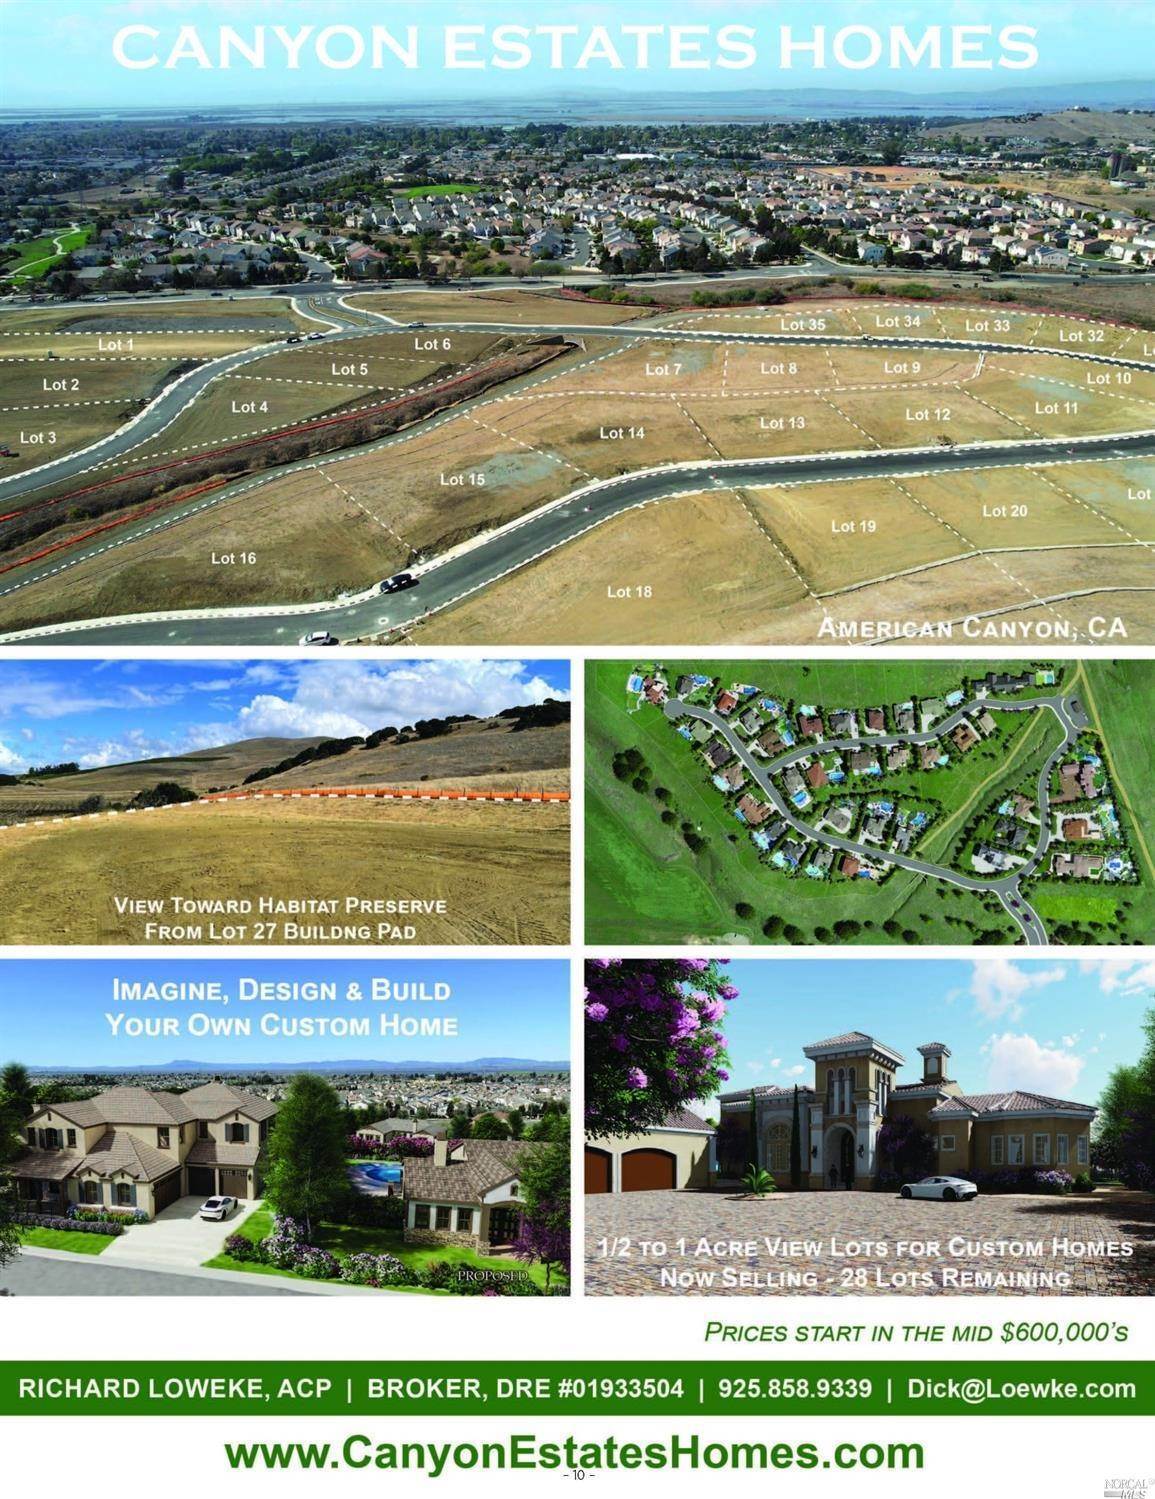 7. Land for Sale at 325 Canyon Estates Ct #Lot27 American Canyon, California 94503 United States